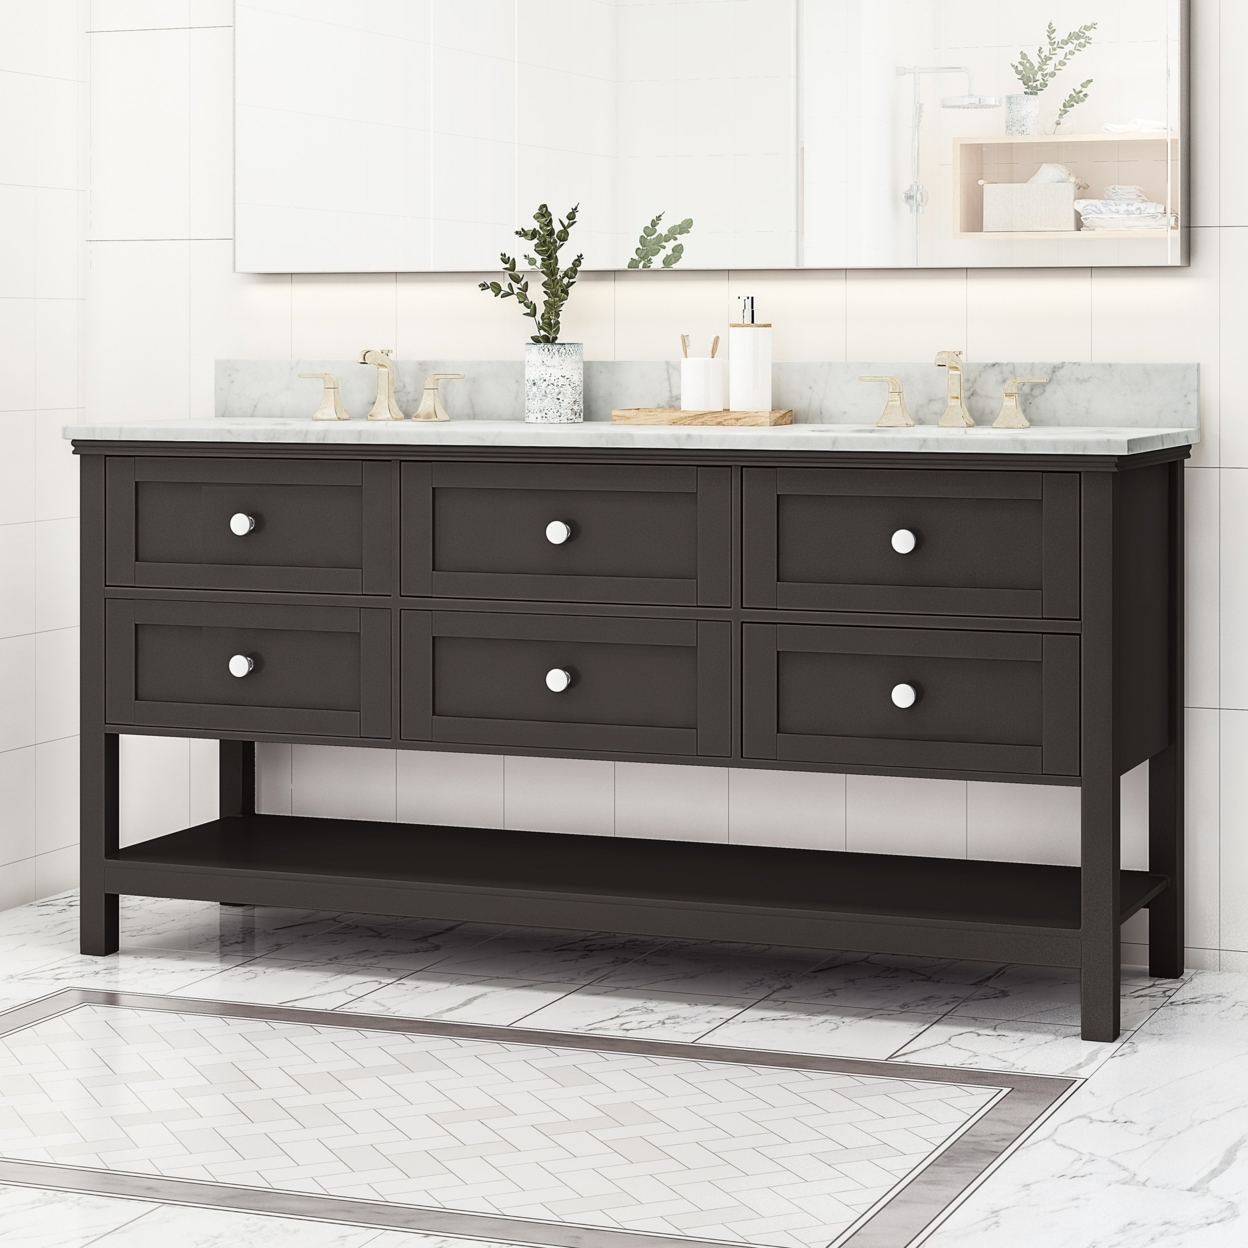 Douvier Contemporary 72 Wood Double Sink Bathroom Vanity With Marble Counter Top With Carrara White Marble - Gray